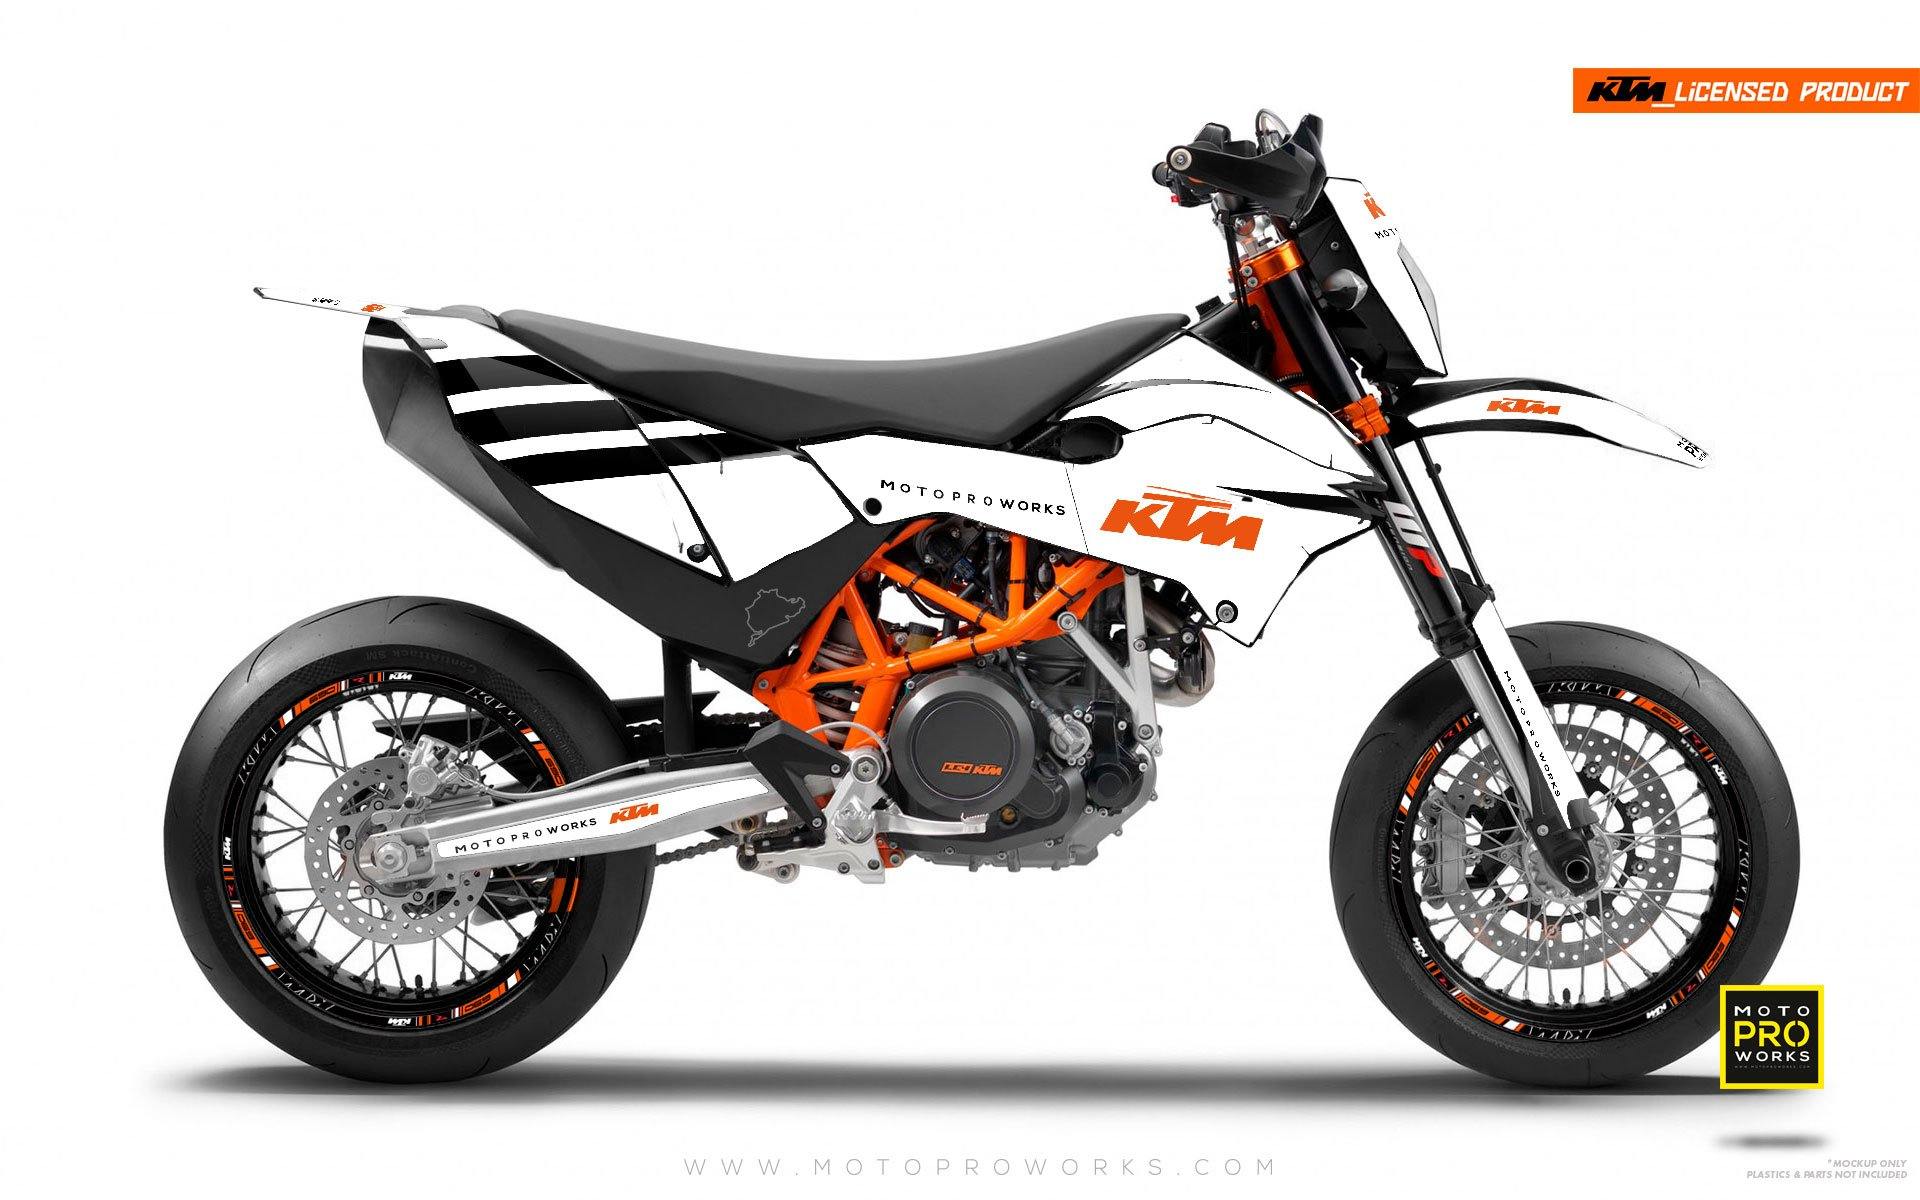 KTM GRAPHIC KIT - "FLAT ICON" (white) - MotoProWorks | Decals and Bike Graphic kit